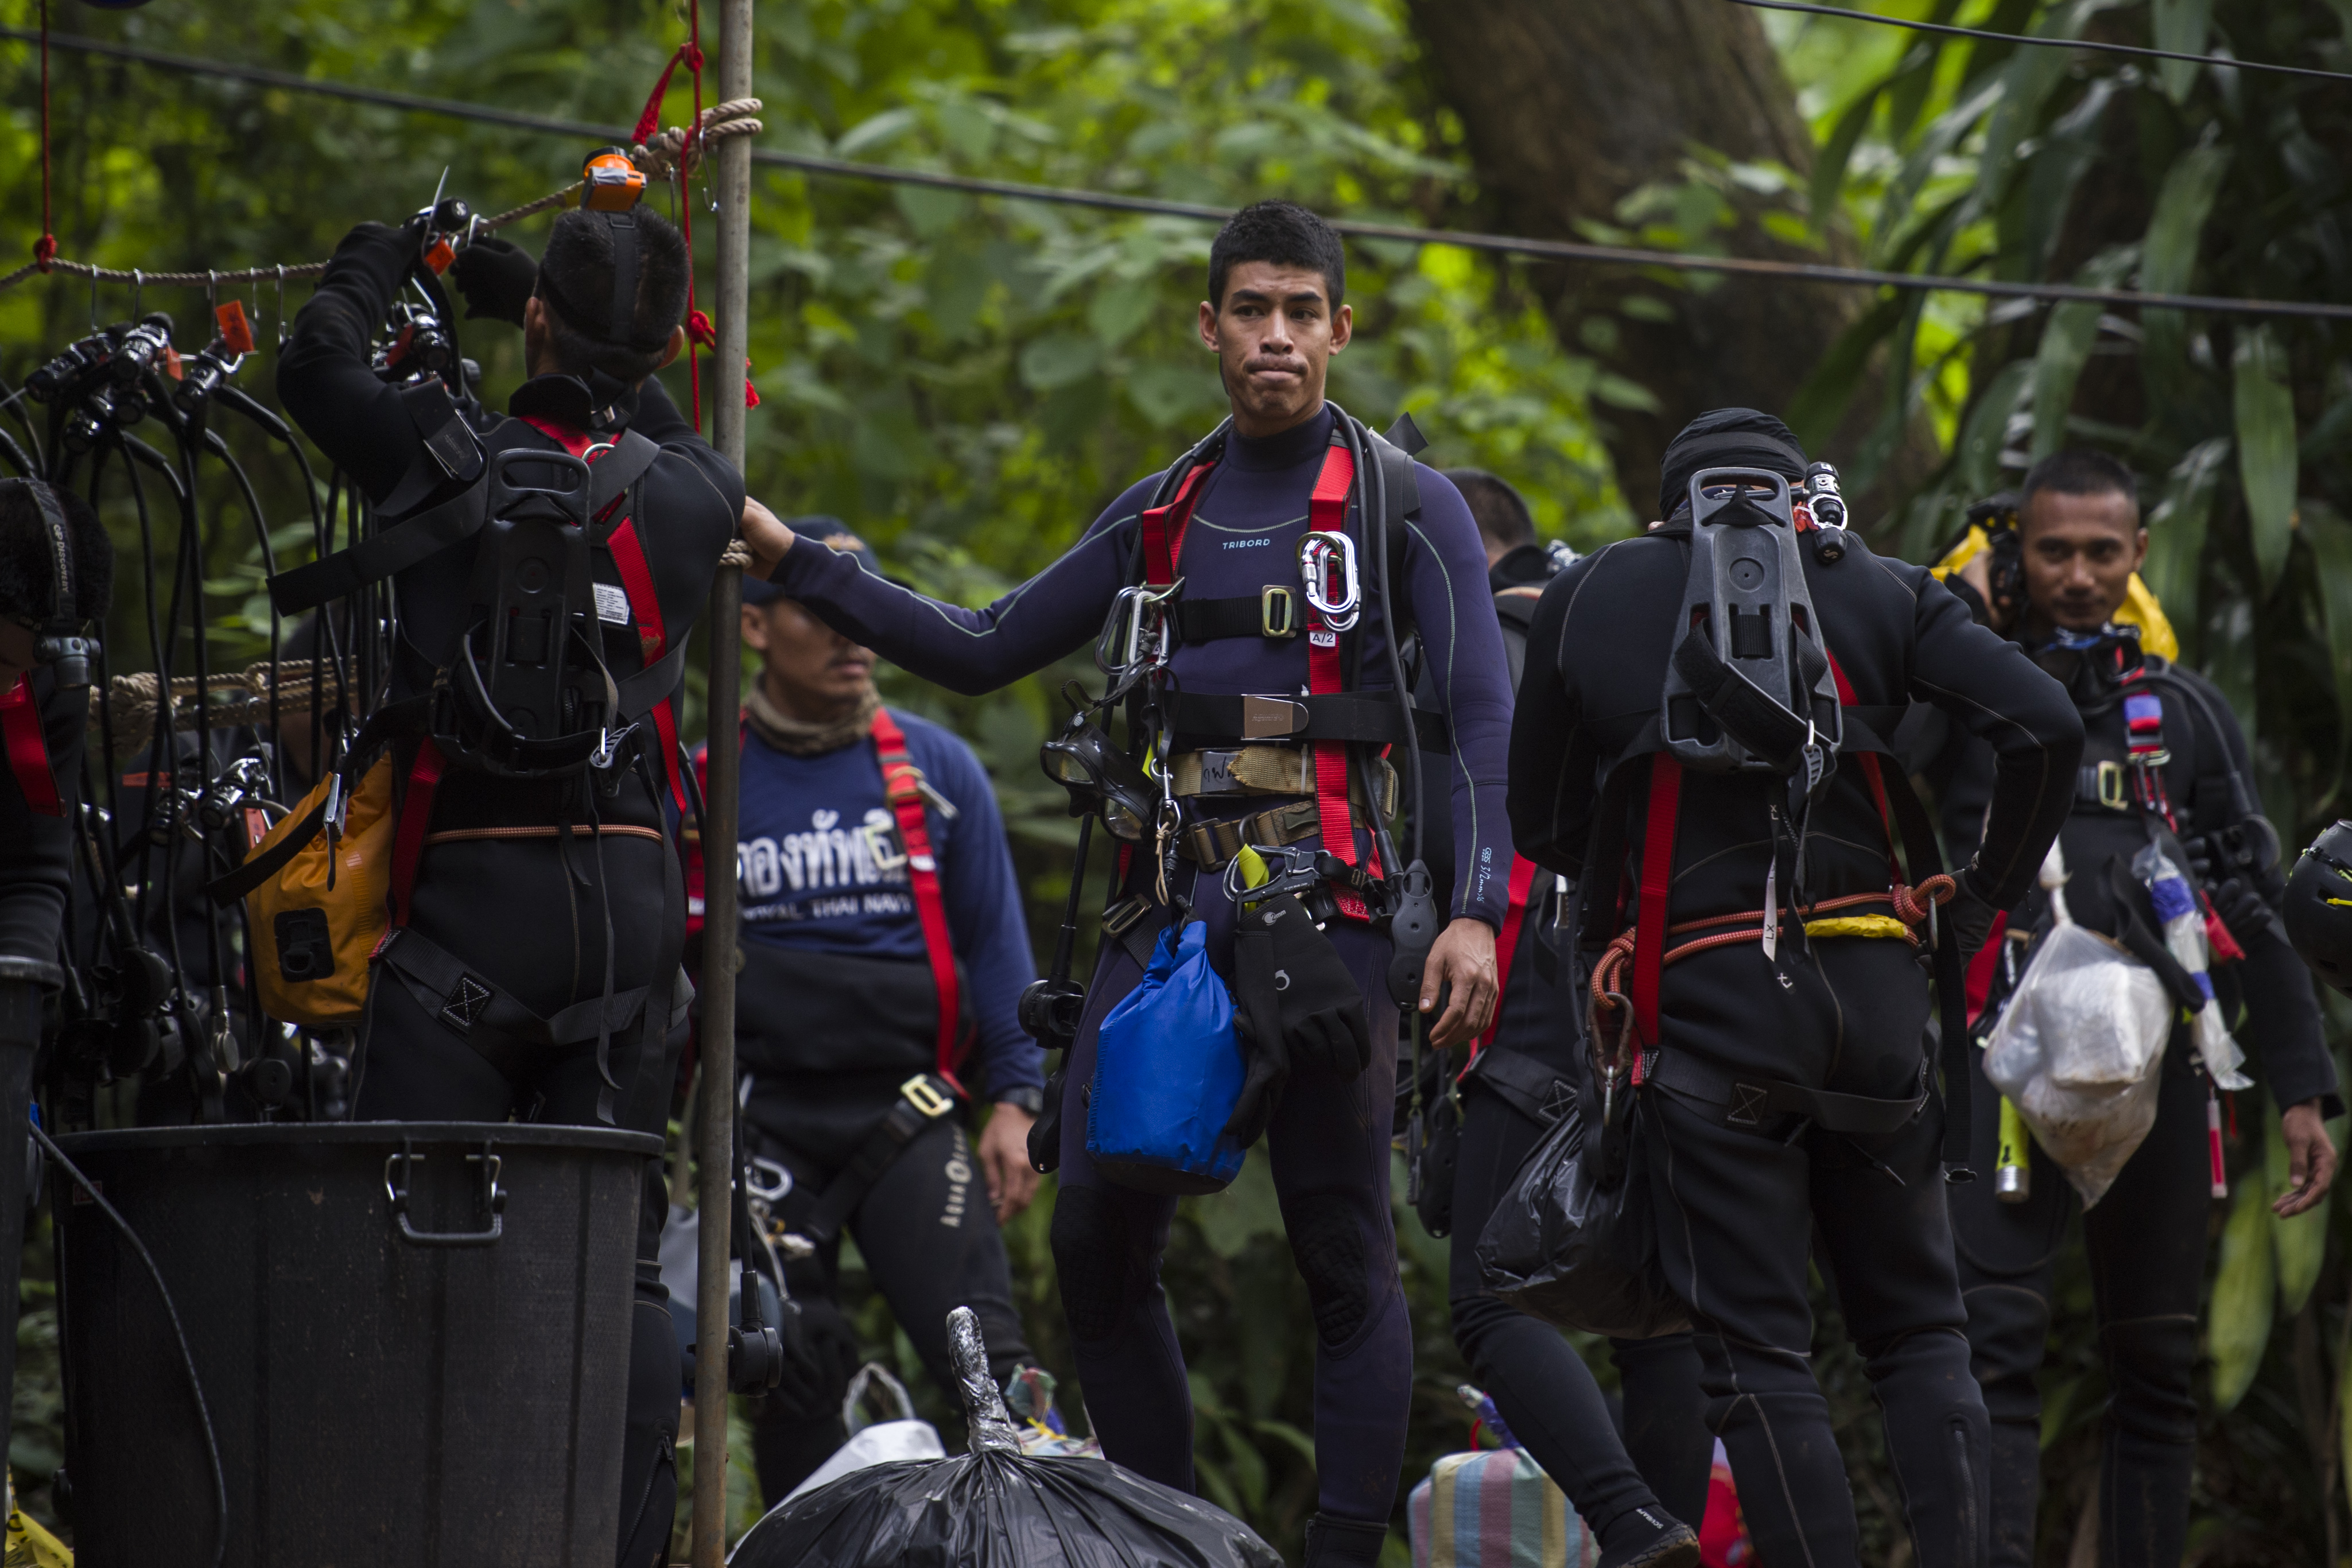 Thai divers carry supplies as rescue operations continue for 12 boys and their coach trapped at Tham Luang cave at Khun Nam Nang Non Forest Park in the Mae Sai district of Chiang Rai province